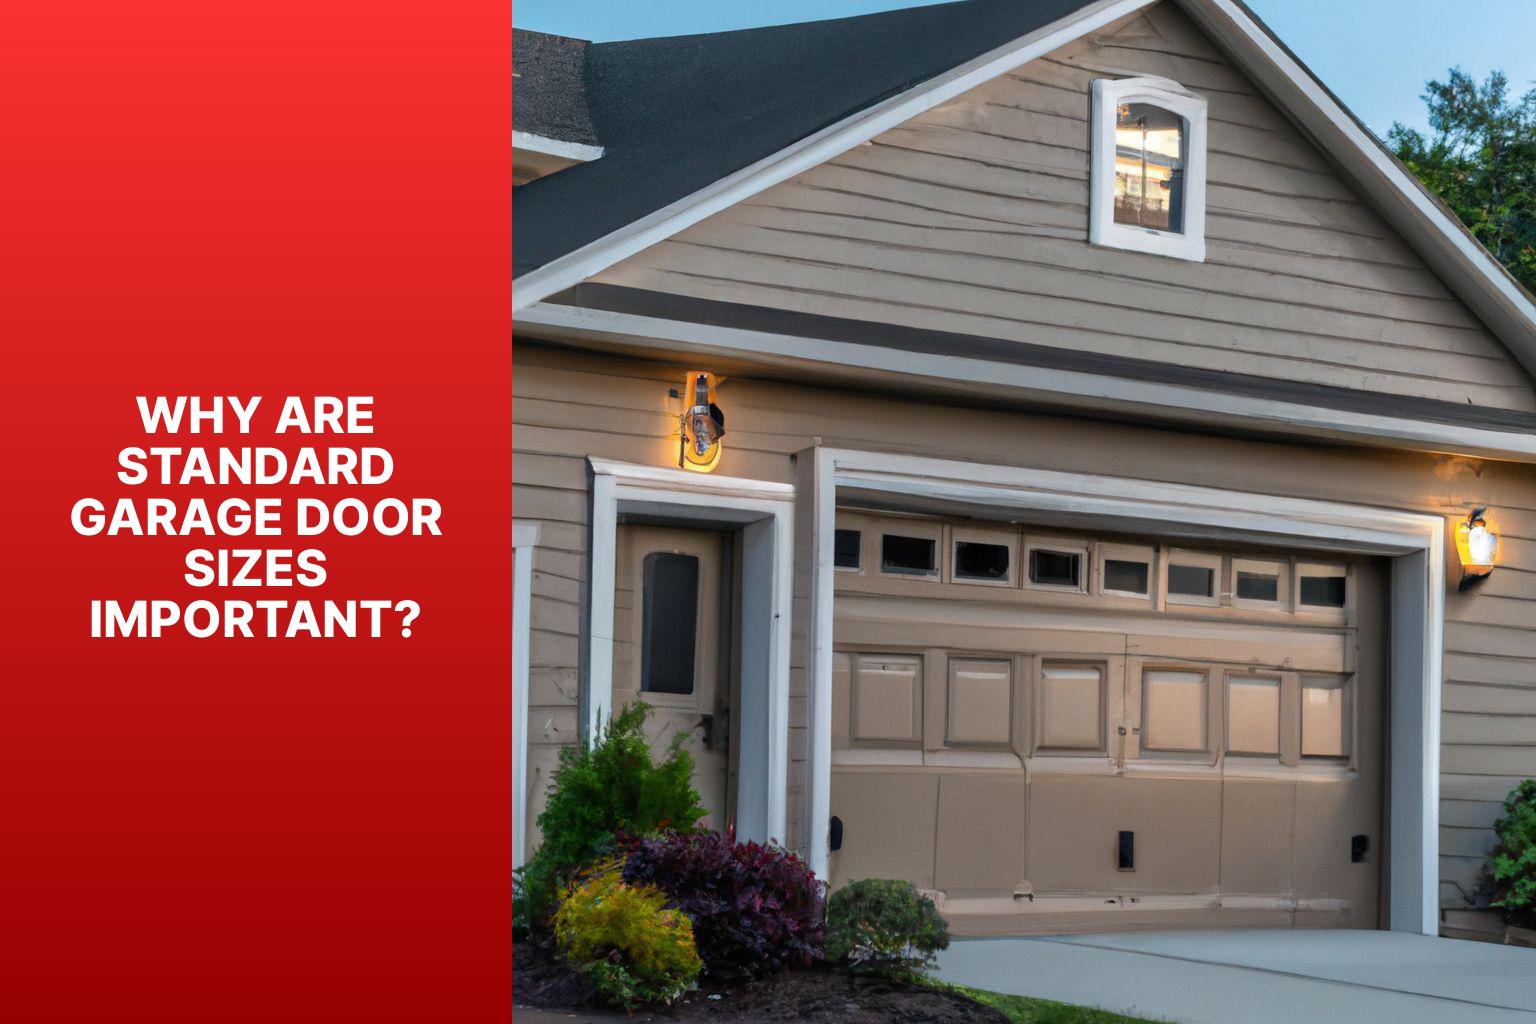 Why Are Standard Garage Door Sizes Important? - What Are the Standard Garage Door Sizes? 